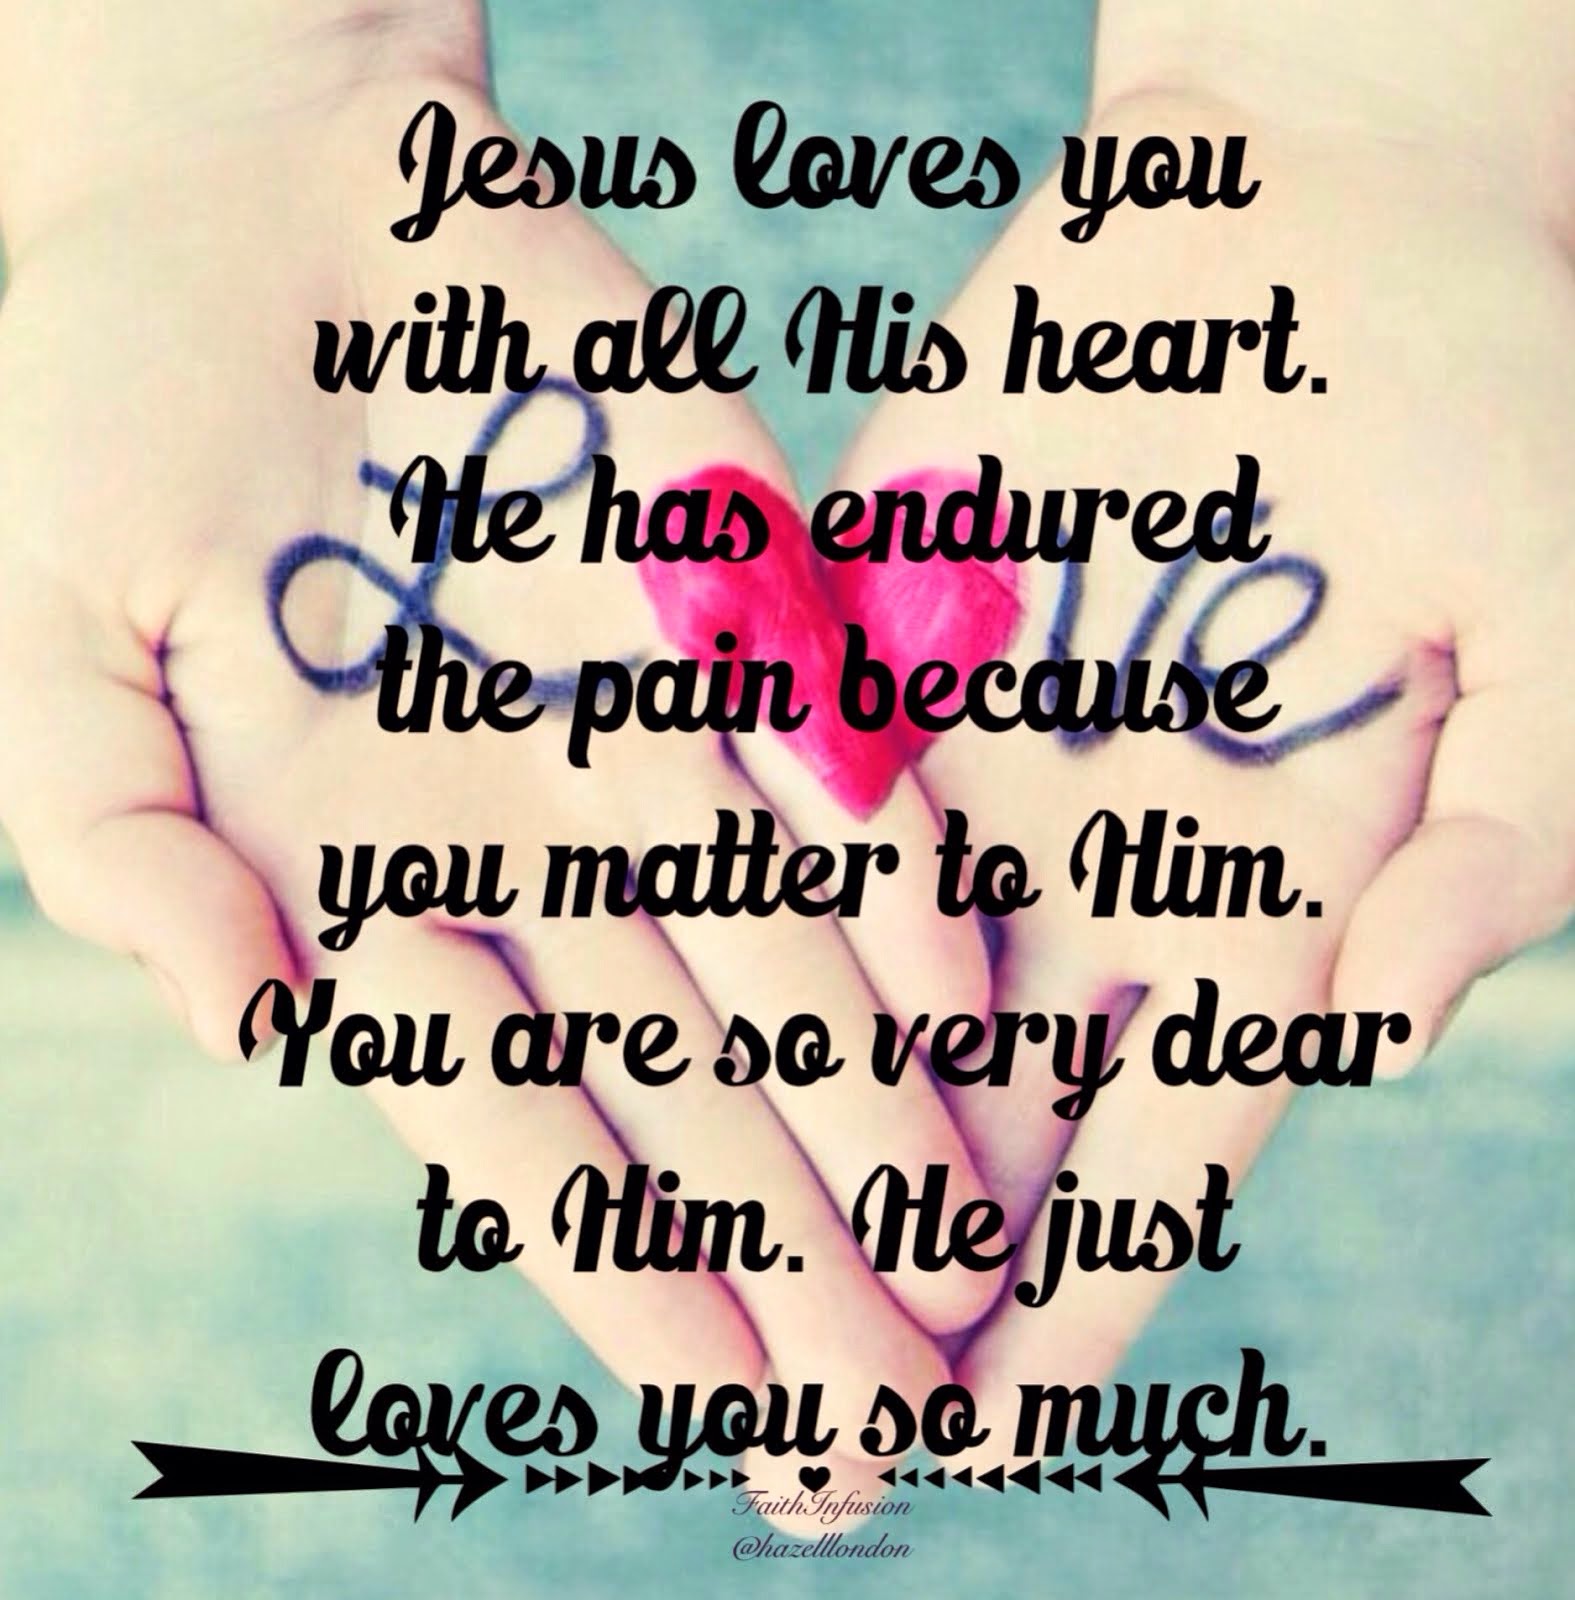 Jesus loves you with all His heart. He has endured the pain because you matter to Him.